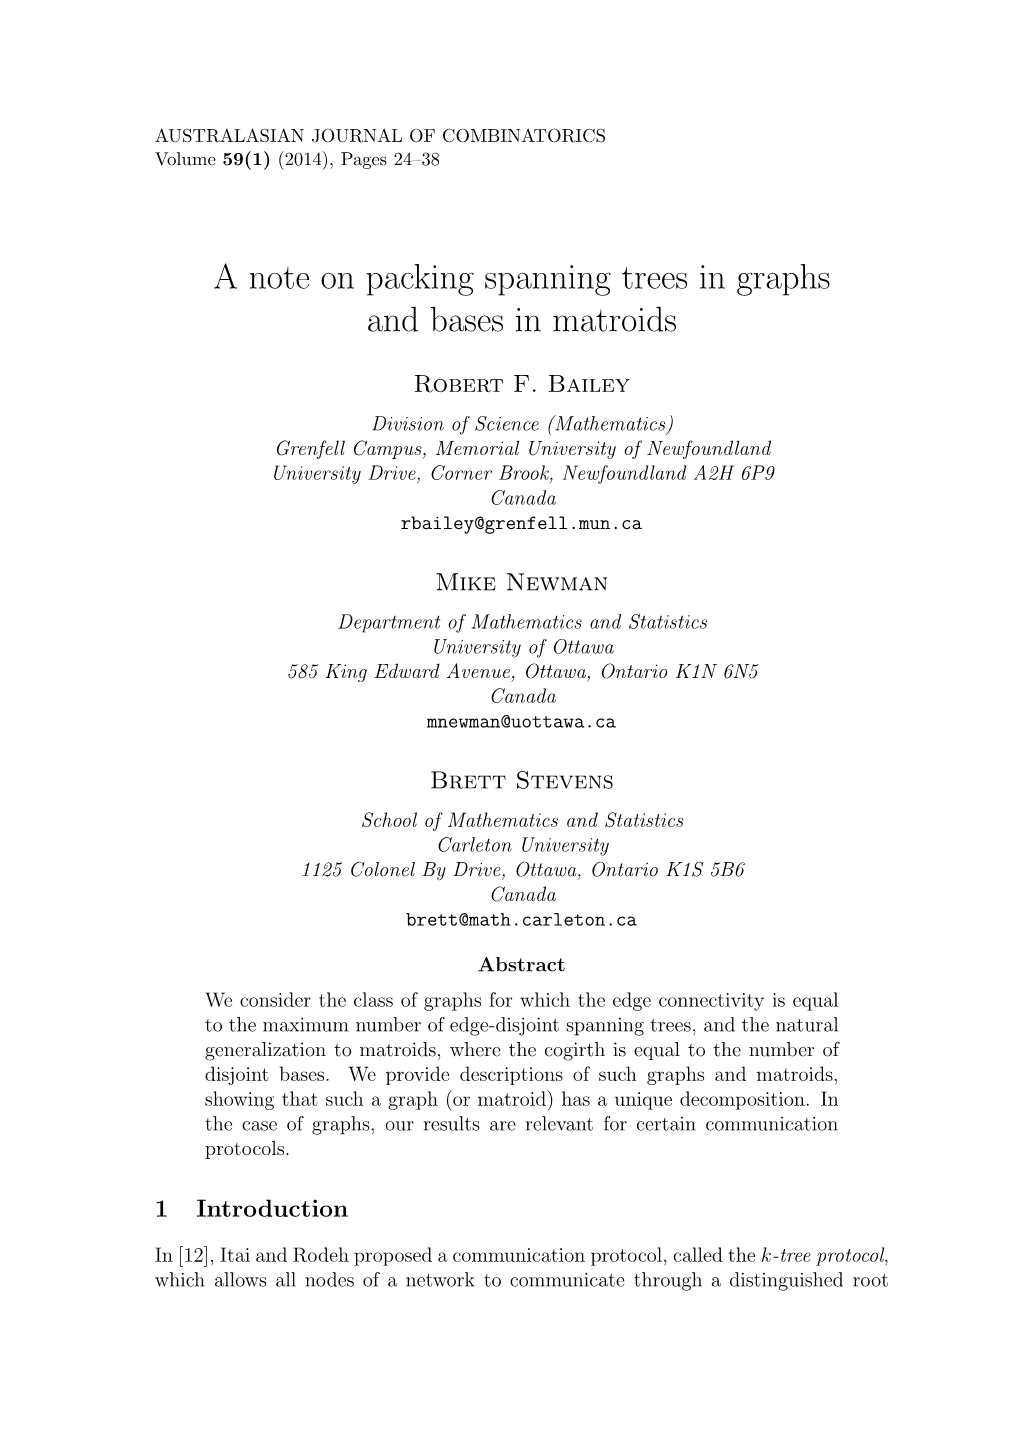 A Note on Packing Spanning Trees in Graphs and Bases in Matroids